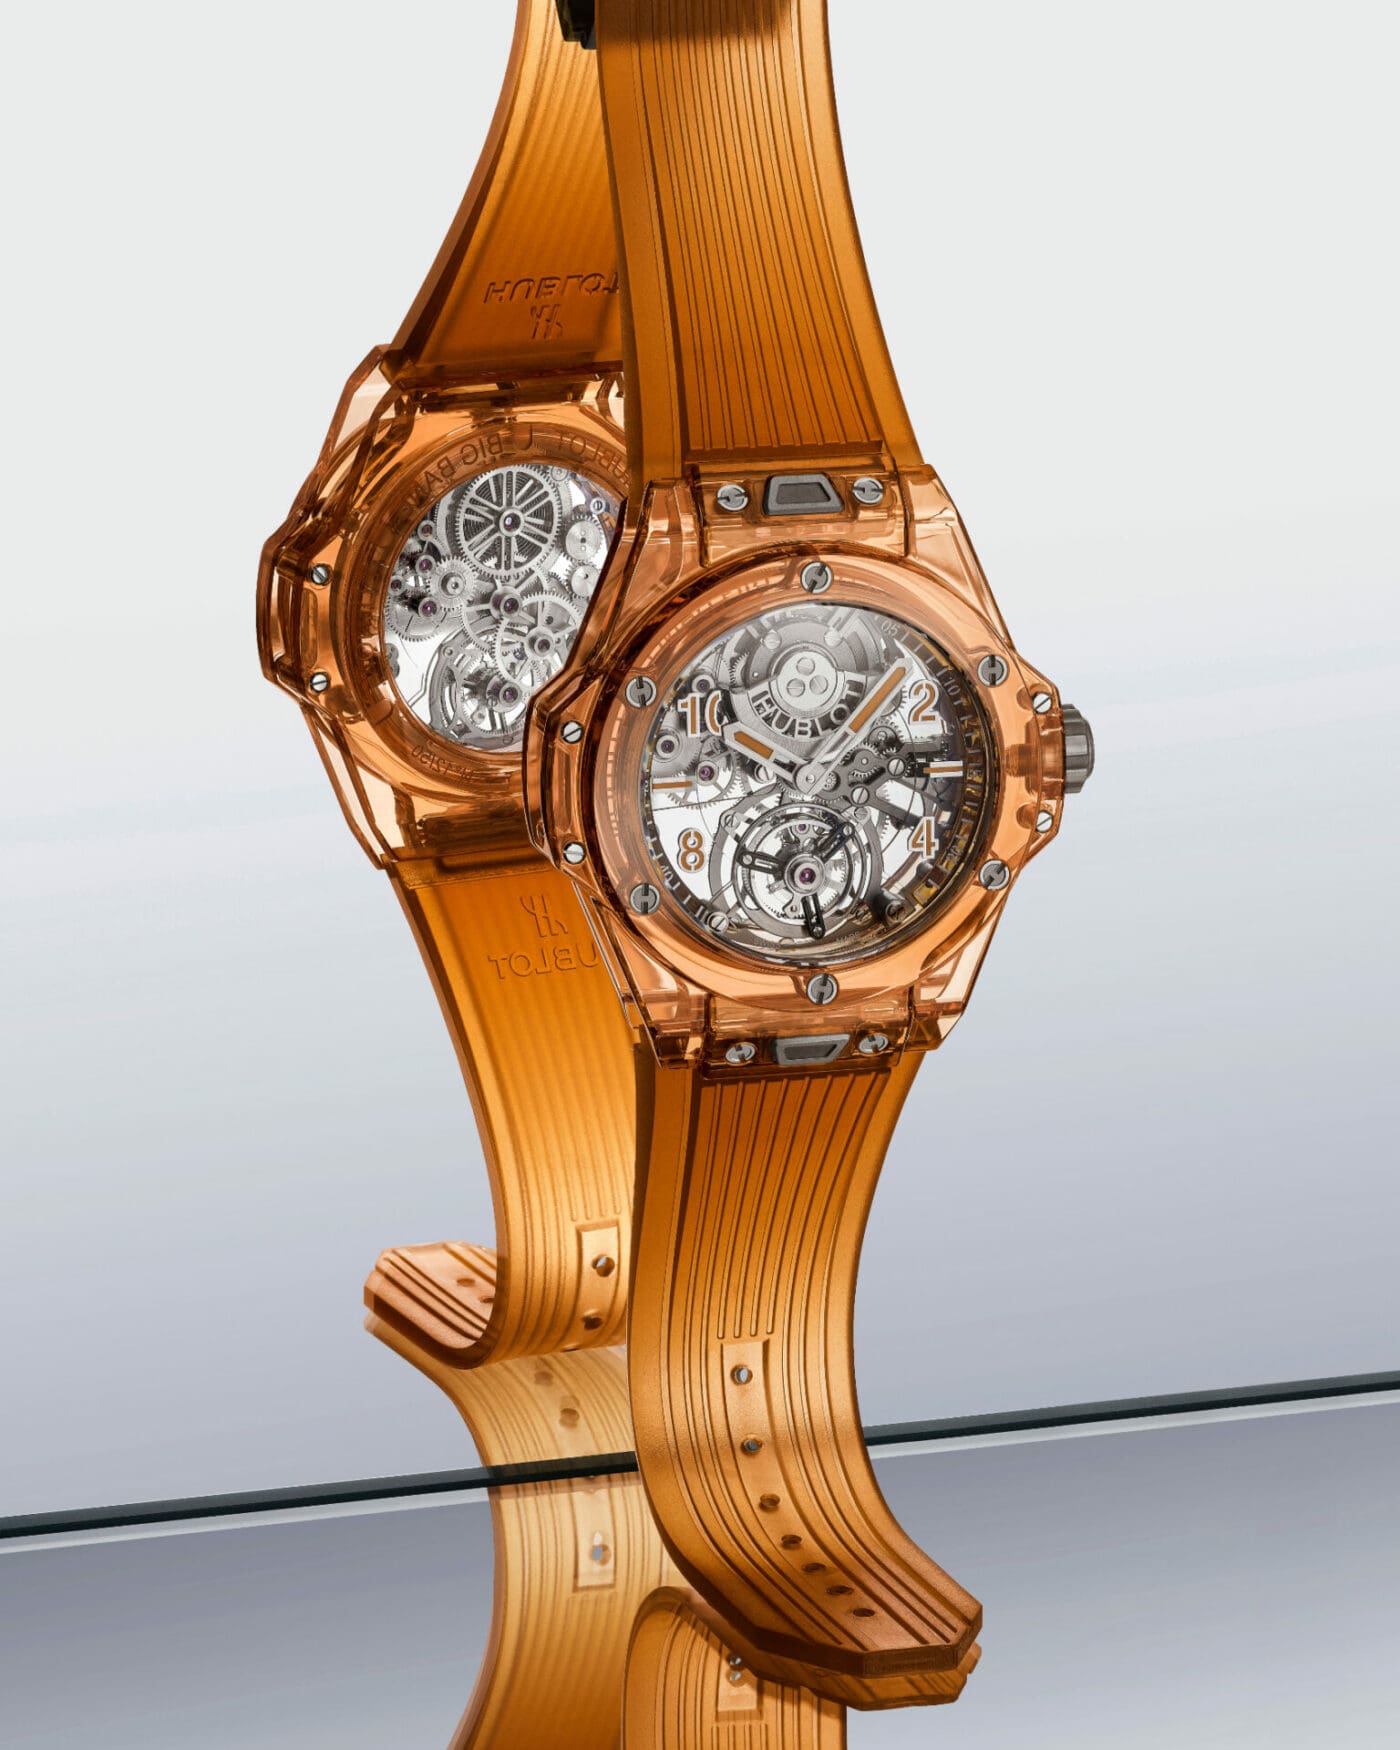 INTRODUCING: The juiced up Hublot Big Bang Tourbillon Automatic Orange Sapphire adds another shade to the wristflex rainbow